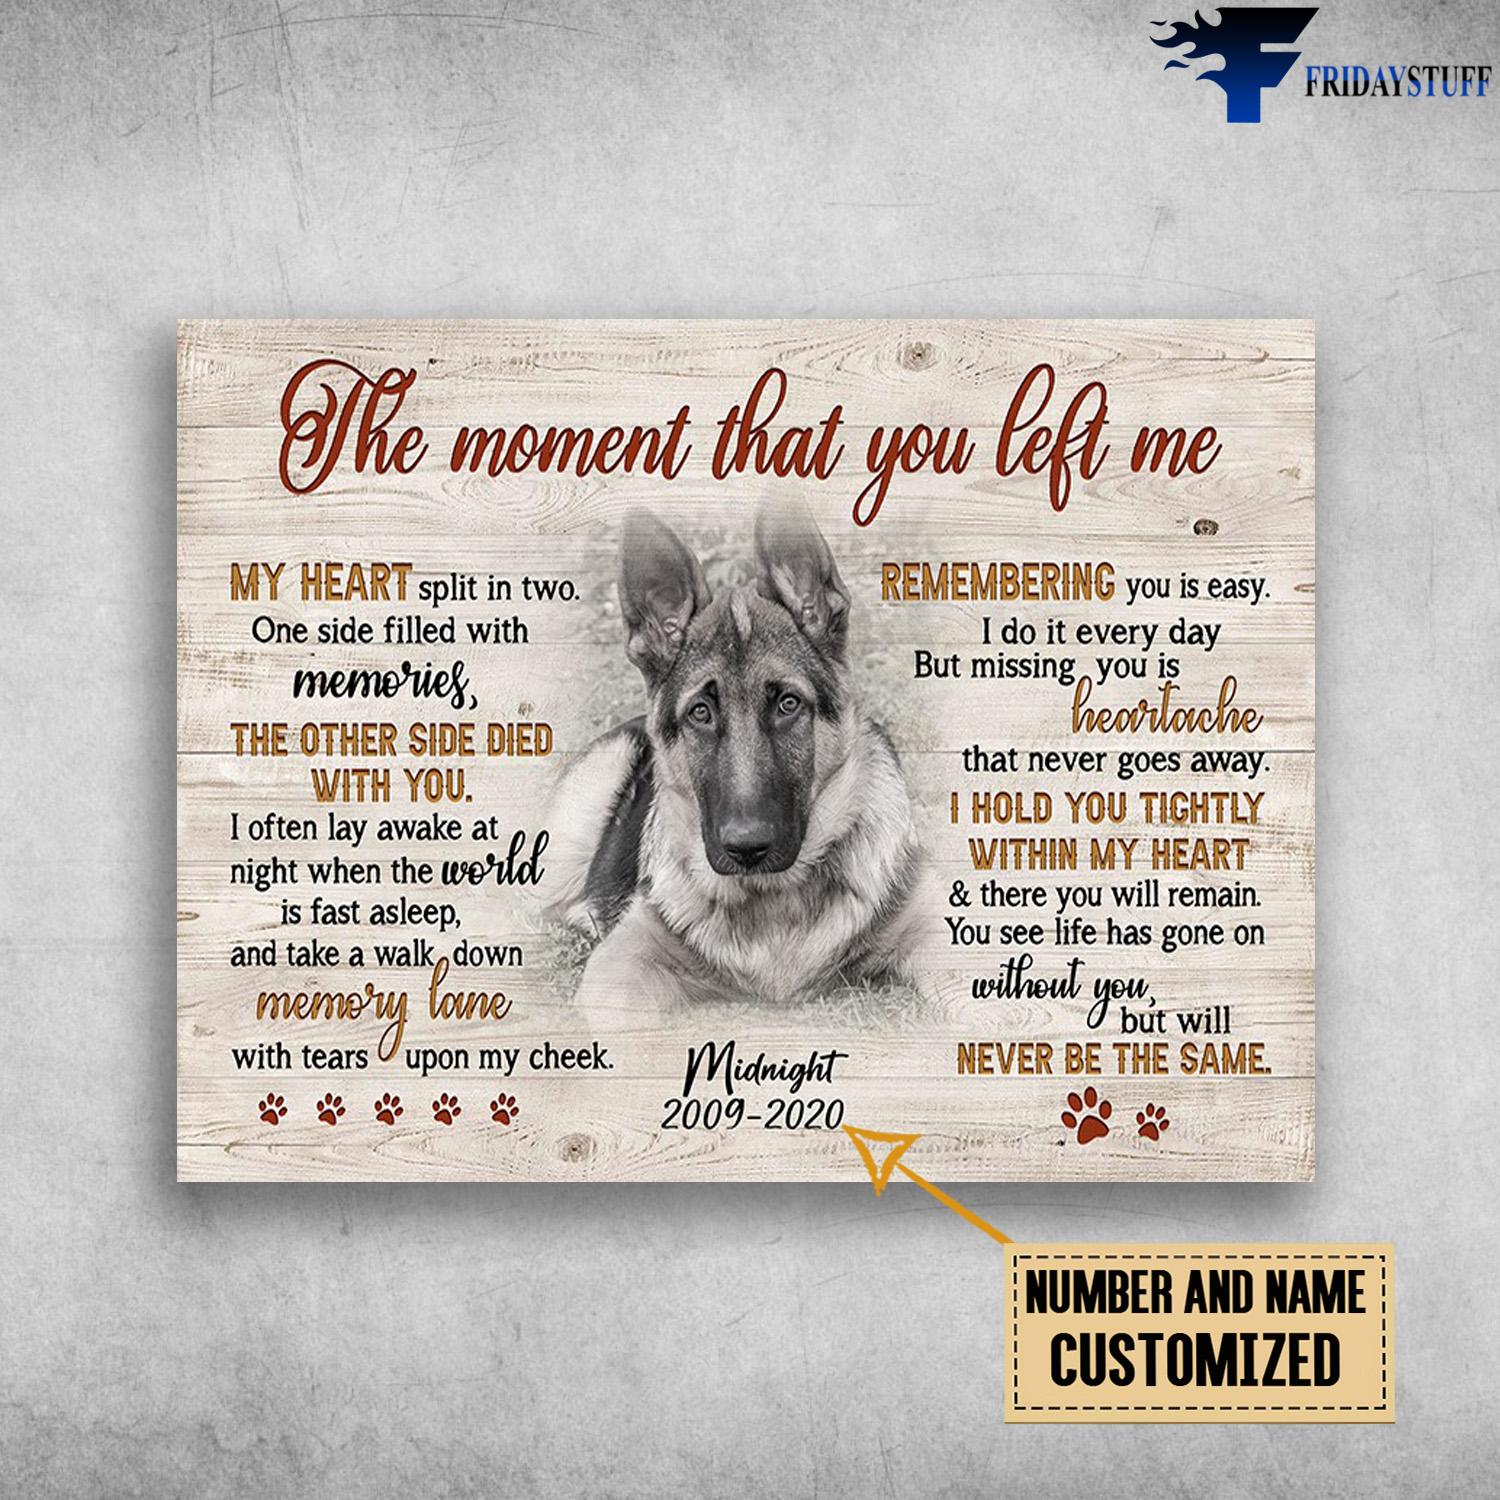 German Shepherd Dog, Dog Lover, The Moment That You Left Me, My Heart Split In Two, One Side Filled With Memoties, The Other Side, Died With You, I Often Lay Awake At Night, When World Is Fast Asleep